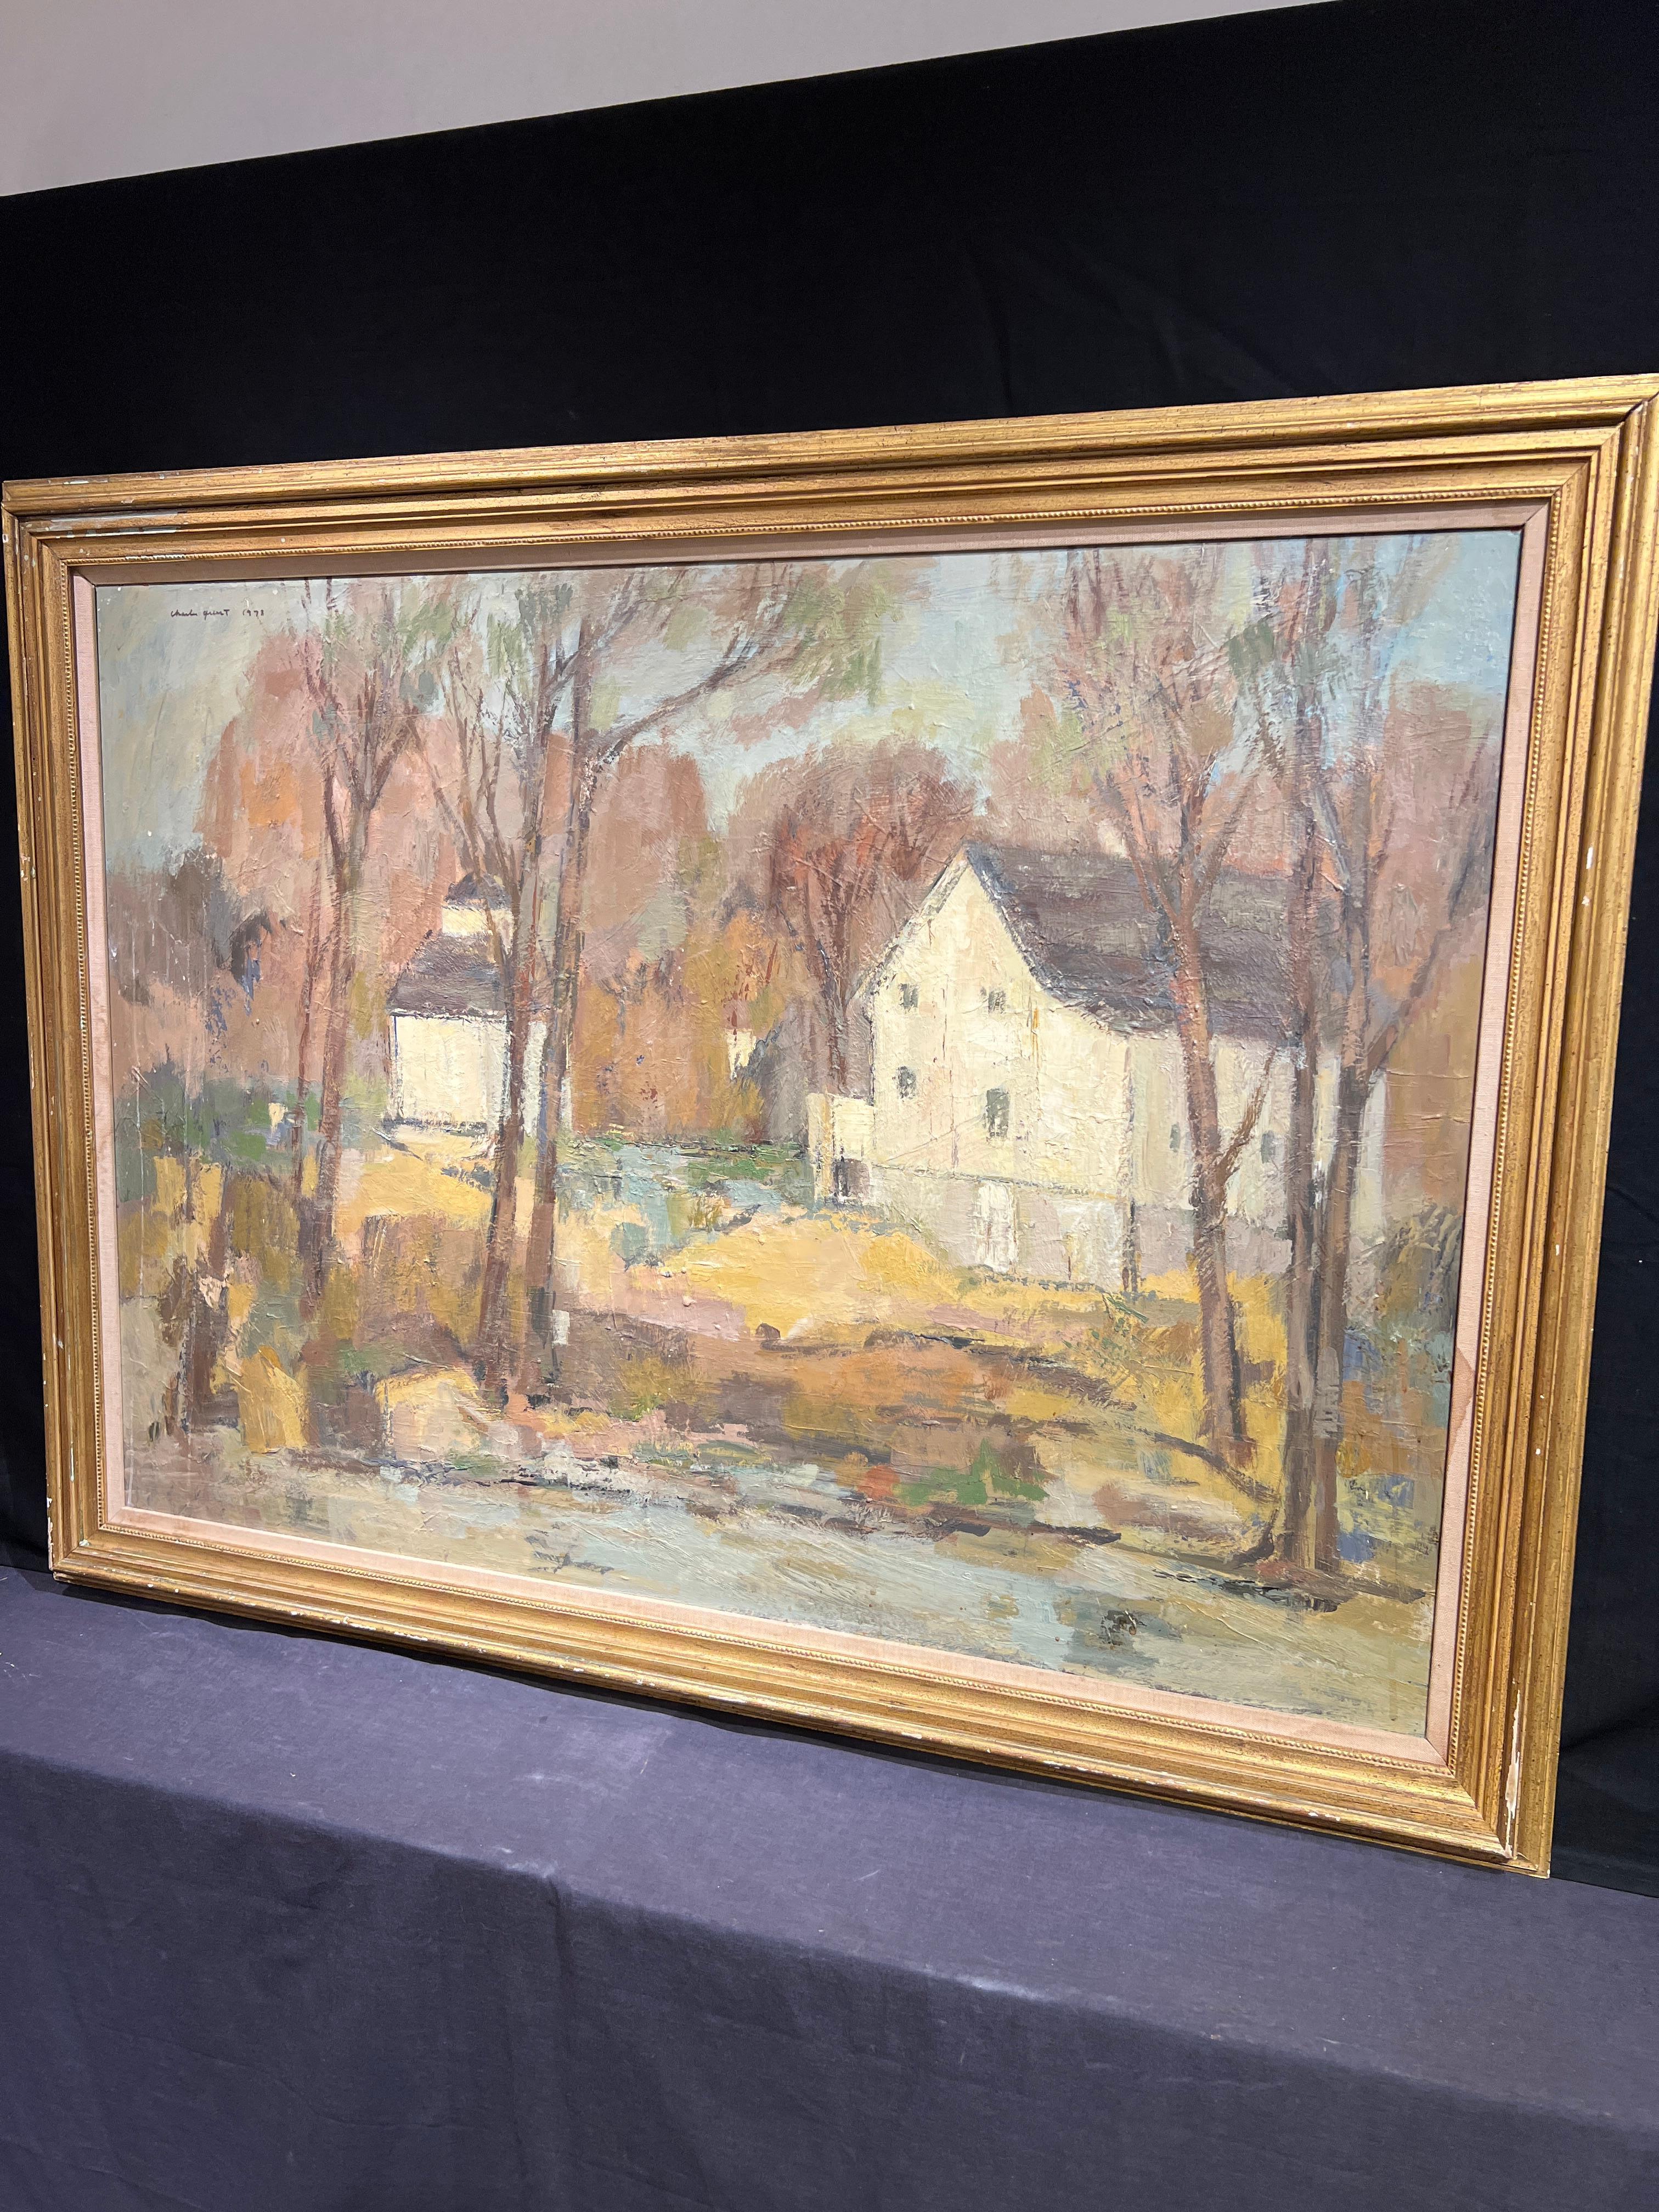 Millhouse, Autumn, 1973
By. Charles Quest (American, 1904-1993)
Signed and Dated Upper Left
33.5 x 45.5 inches
38 x 50.5 inches with frame

Born in Troy, New York, Charles Quest was an active artist and educator in St. Louis, Missouri. From 1929 to